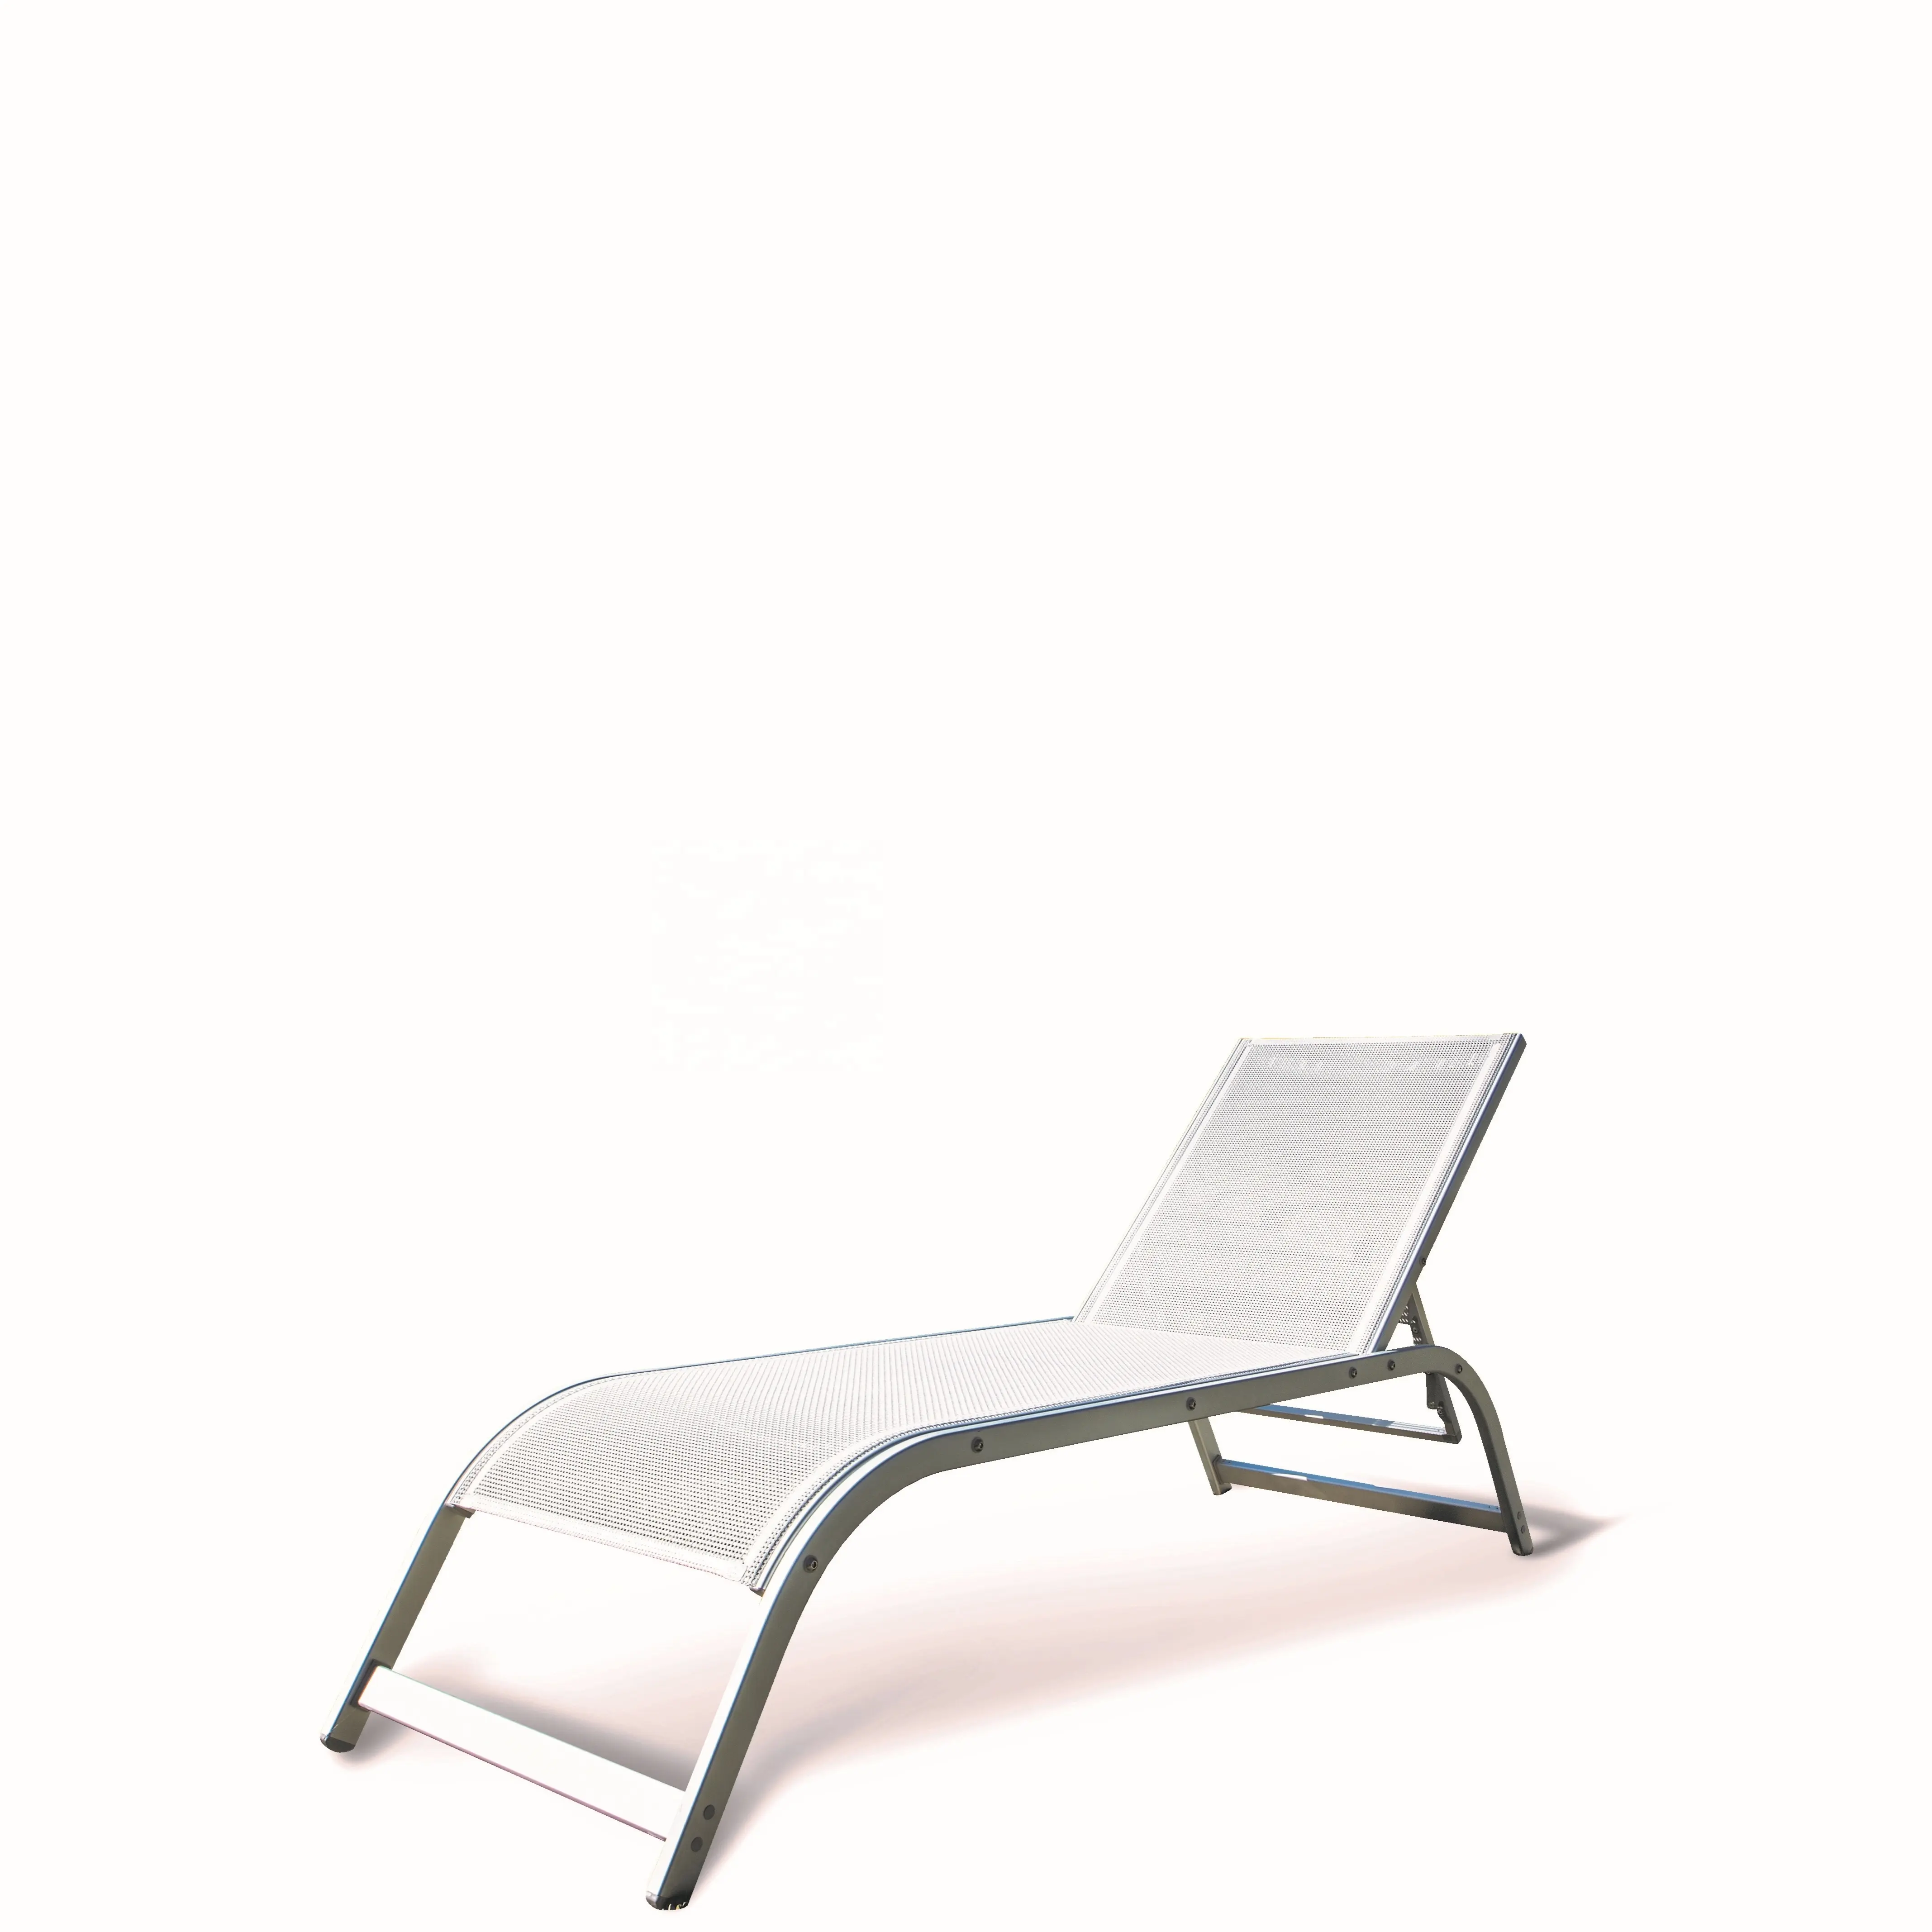 Italian Premium Quality professional sun bed outdoor furniture for all location SUNBED